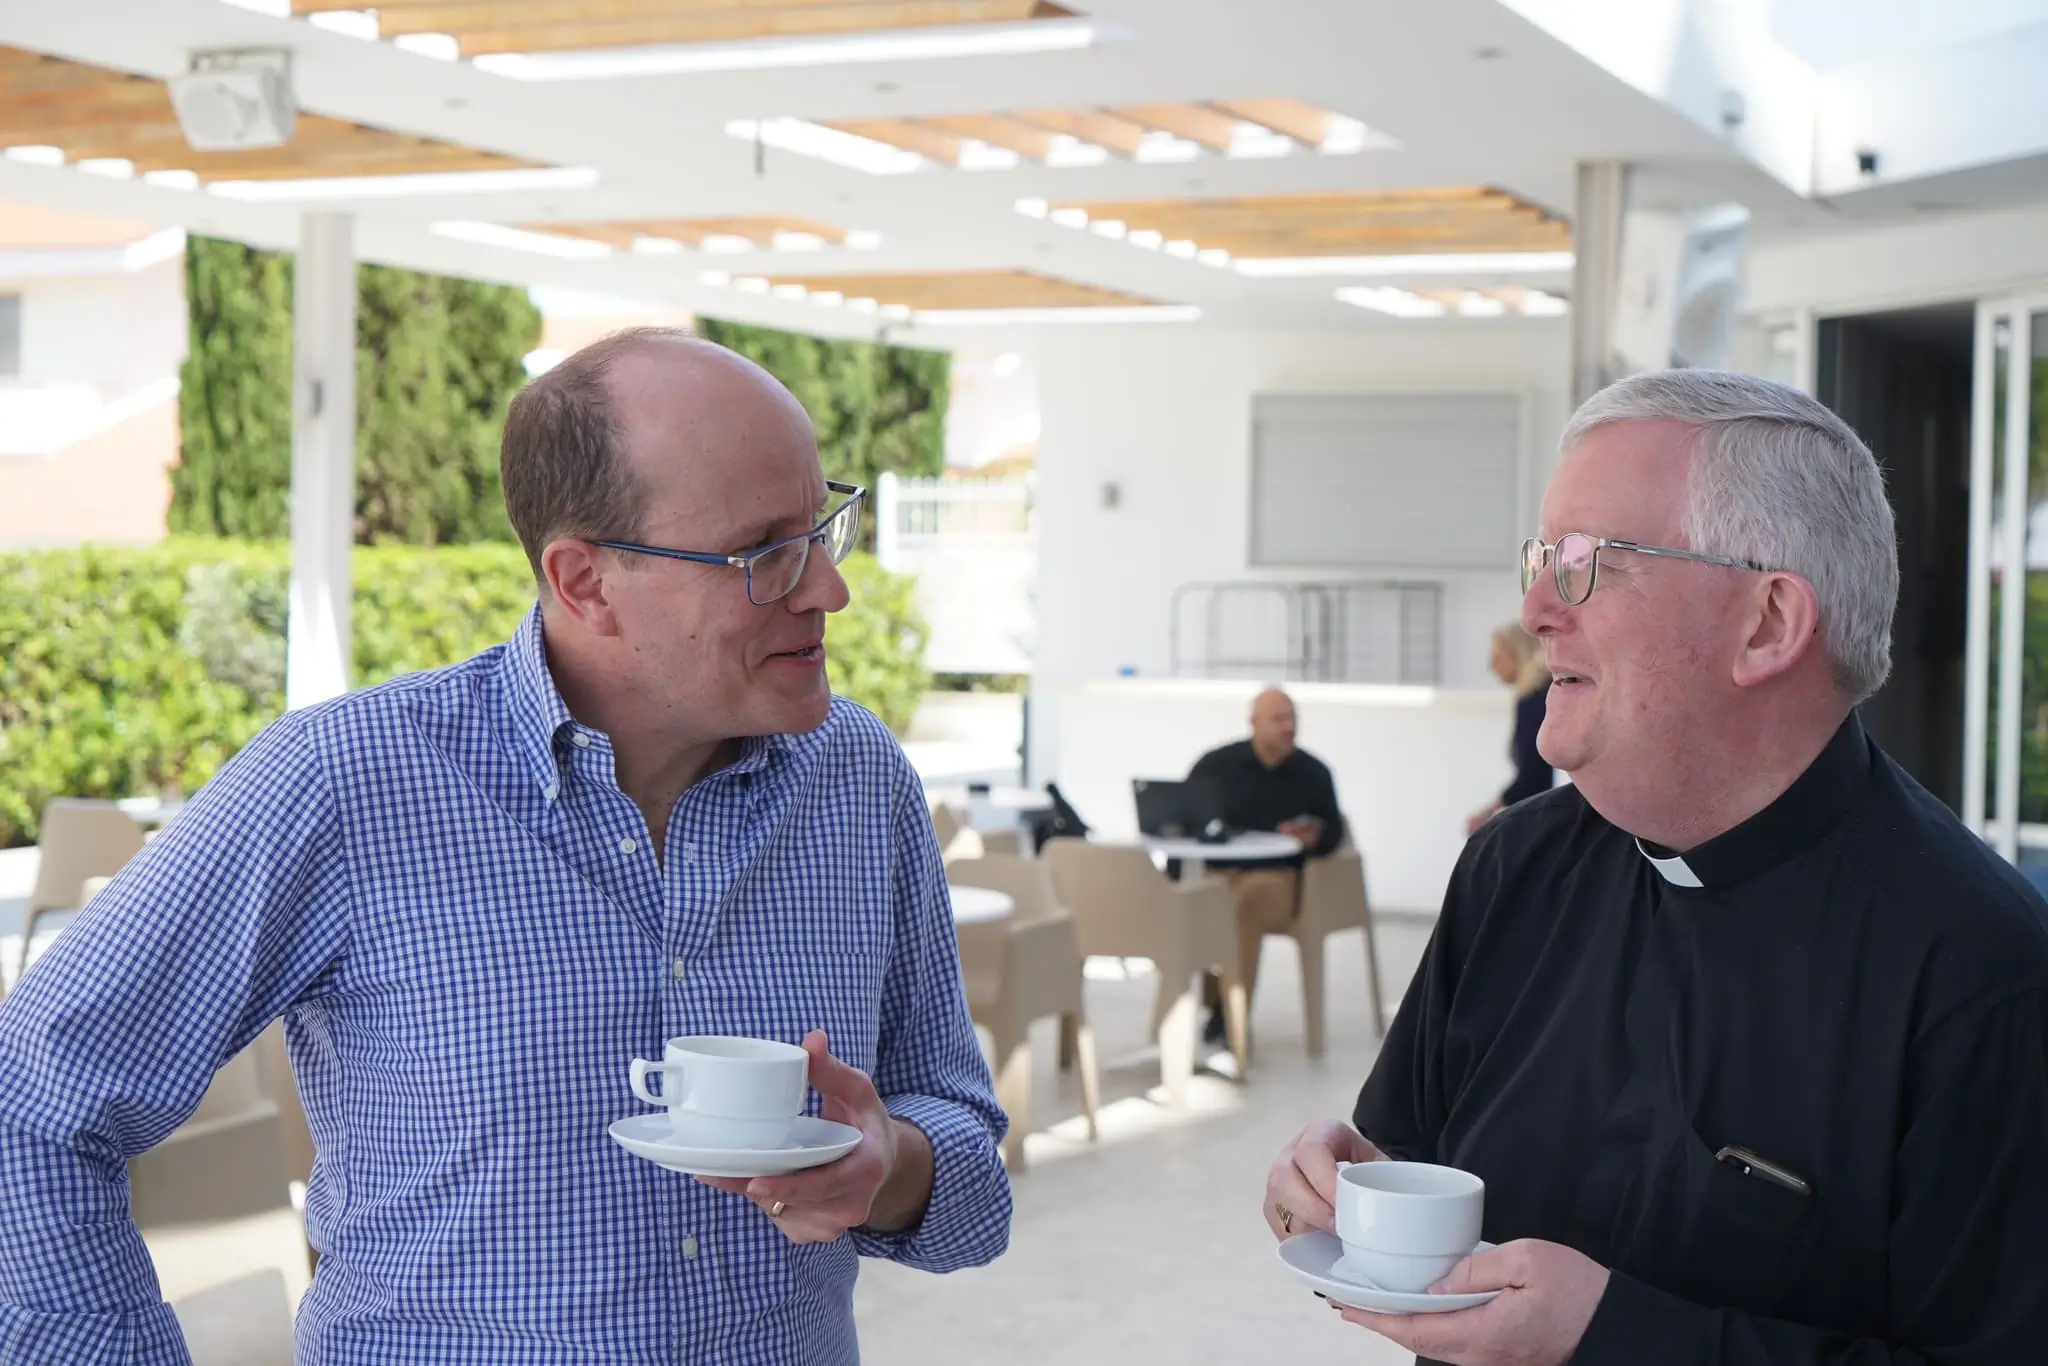 Dr Christopher Wells, co-secretary of ARCIC III, and Archbishop Bernard Longley, co-chair, at the dialogue meeting in Larnaca, Cyprus